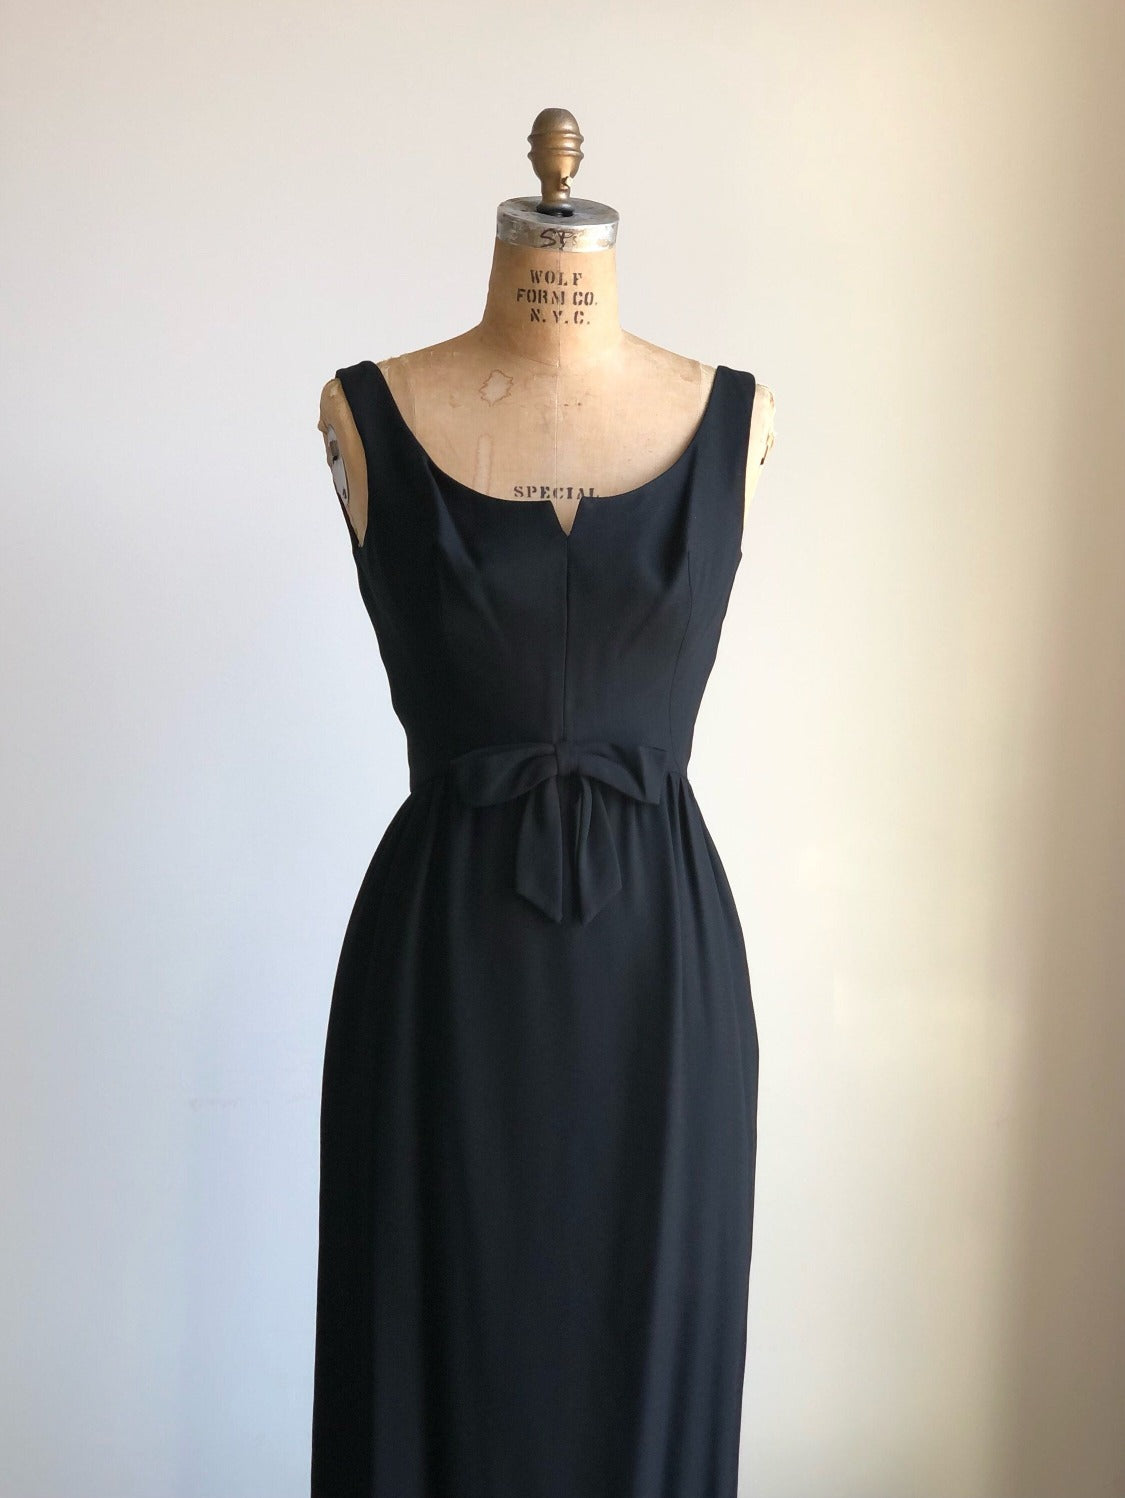 1950s Vintage Black Dress with Bow Audrey Hepburn Inspired SMALL